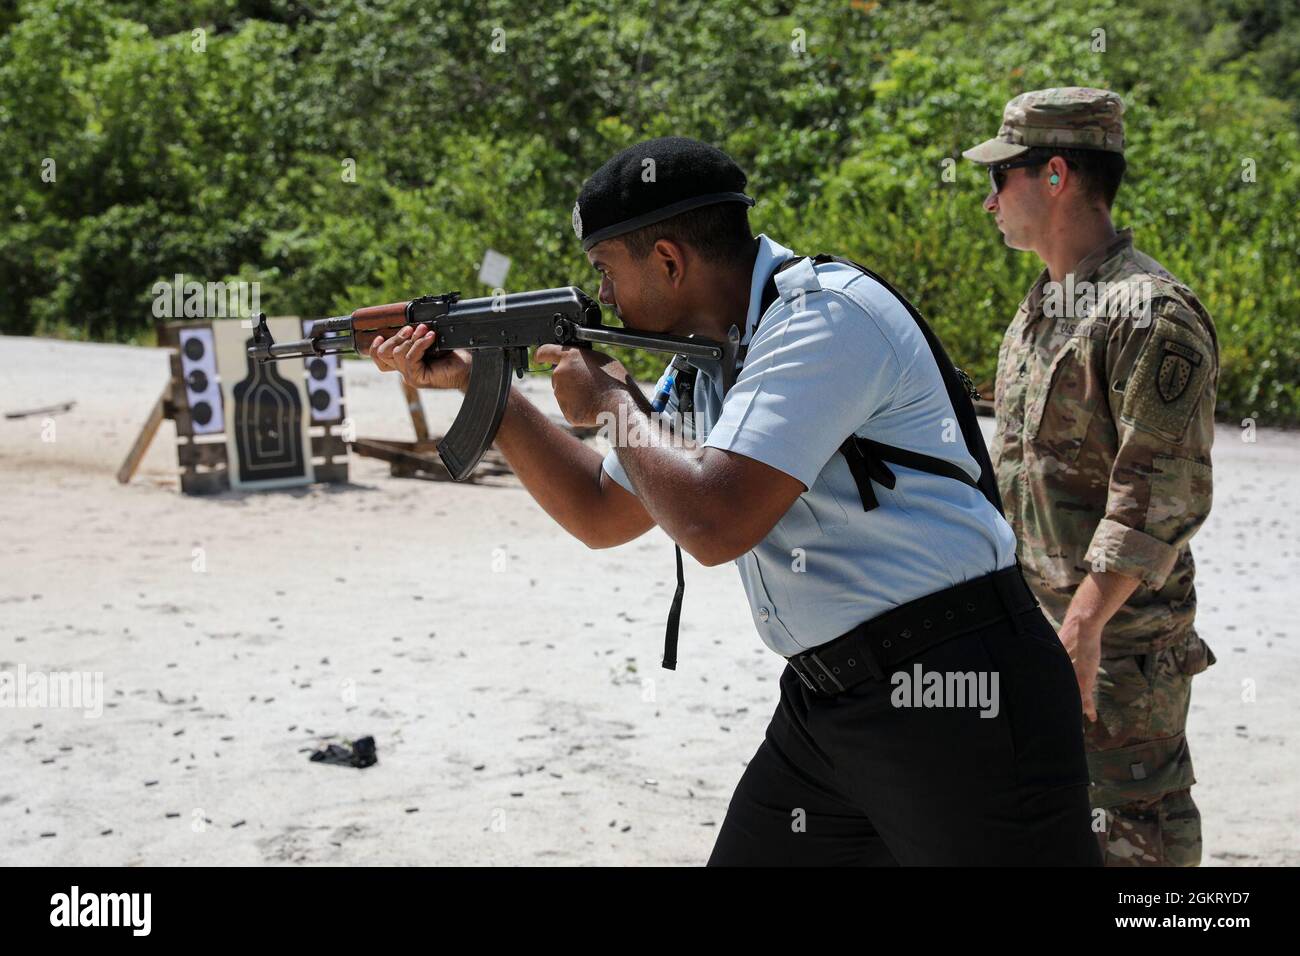 A U.S. Army Soldier with Florida Army National Guard’s (FLARNG) 2nd Battalion, 54th Security Force Assistance Brigade (SFAB) advises a member of the Guyana Police Force on the firing line during Tradewinds 2021, Camp Stephenson, Co-operative Republic of Guyana, June 24. FLARNG SFAB joined other reserve and active duty components as advisors to international forces throughout Tradewinds. Local Police Force representatives engaged in marksmanship training as part of the exercises interoperability development. Tradewinds 2021 is a U.S. Southern Command sponsored Caribbean security-focused exercis Stock Photo